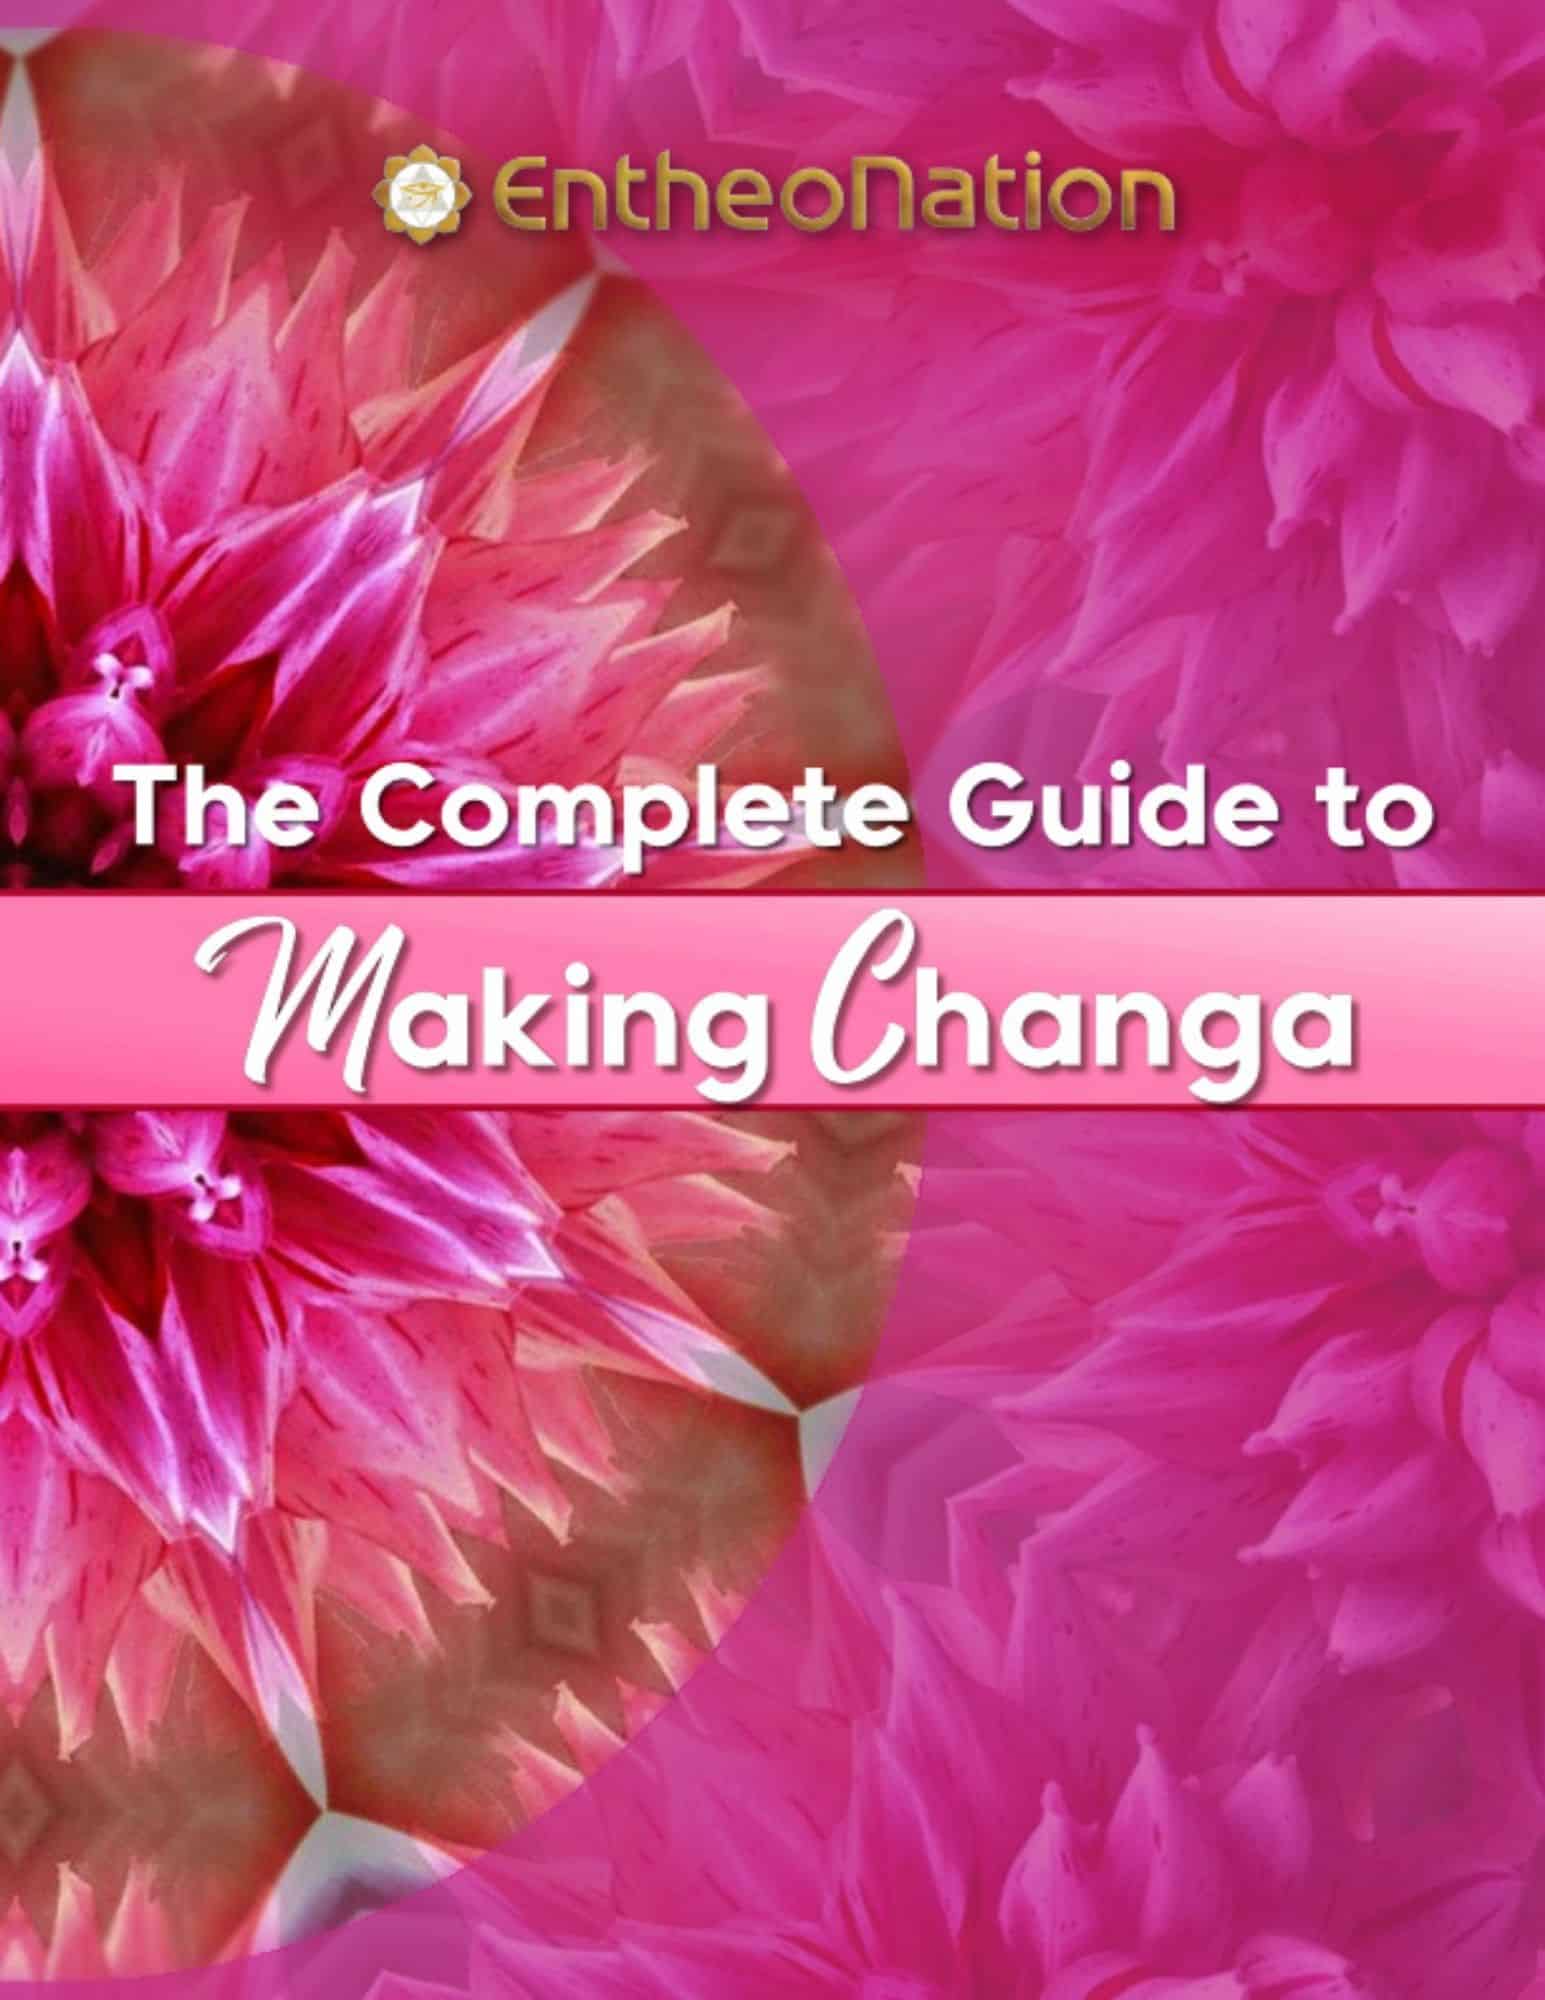 A pink ebook cover for a Changa Guide